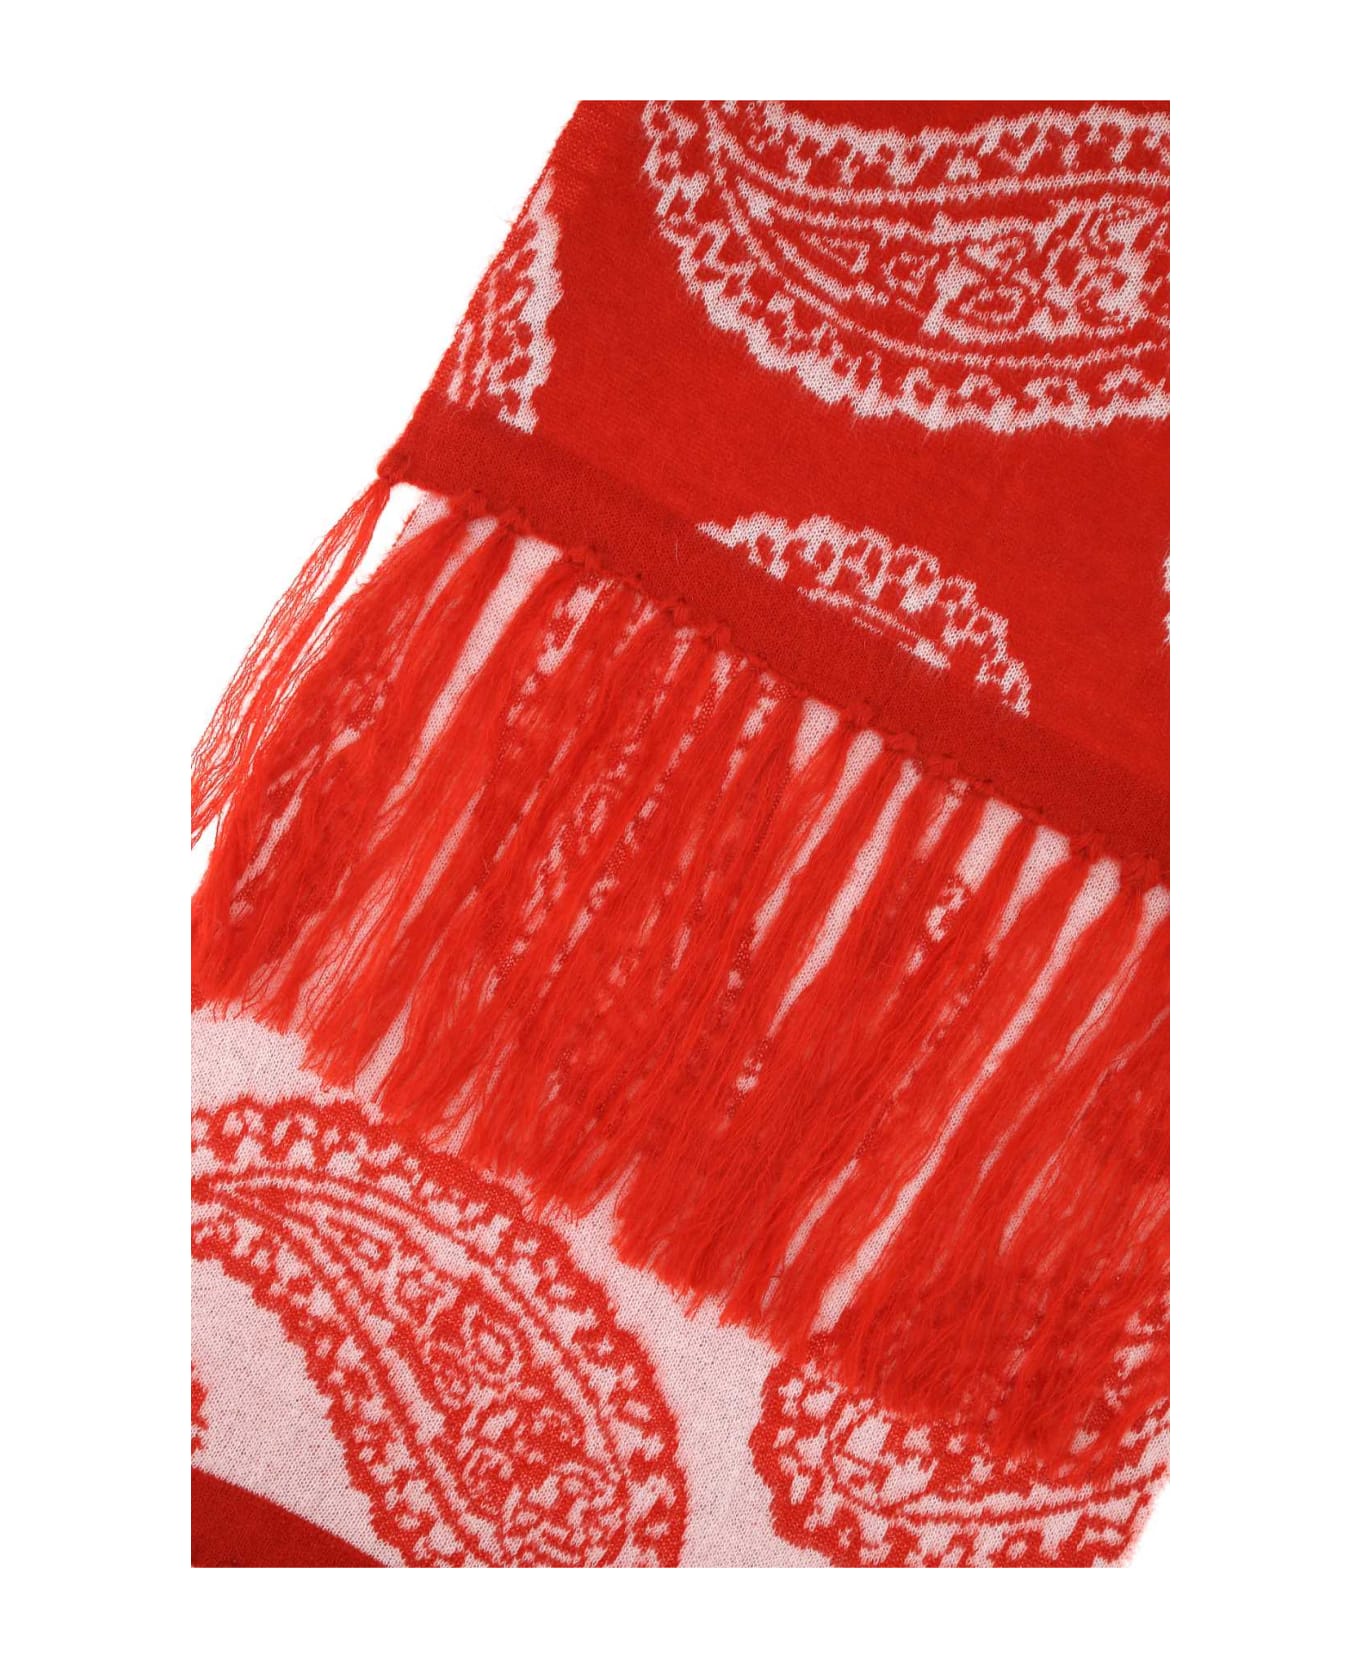 FourTwoFour on Fairfax Embroidered Acrylic Blend Scarf - 18 スカーフ